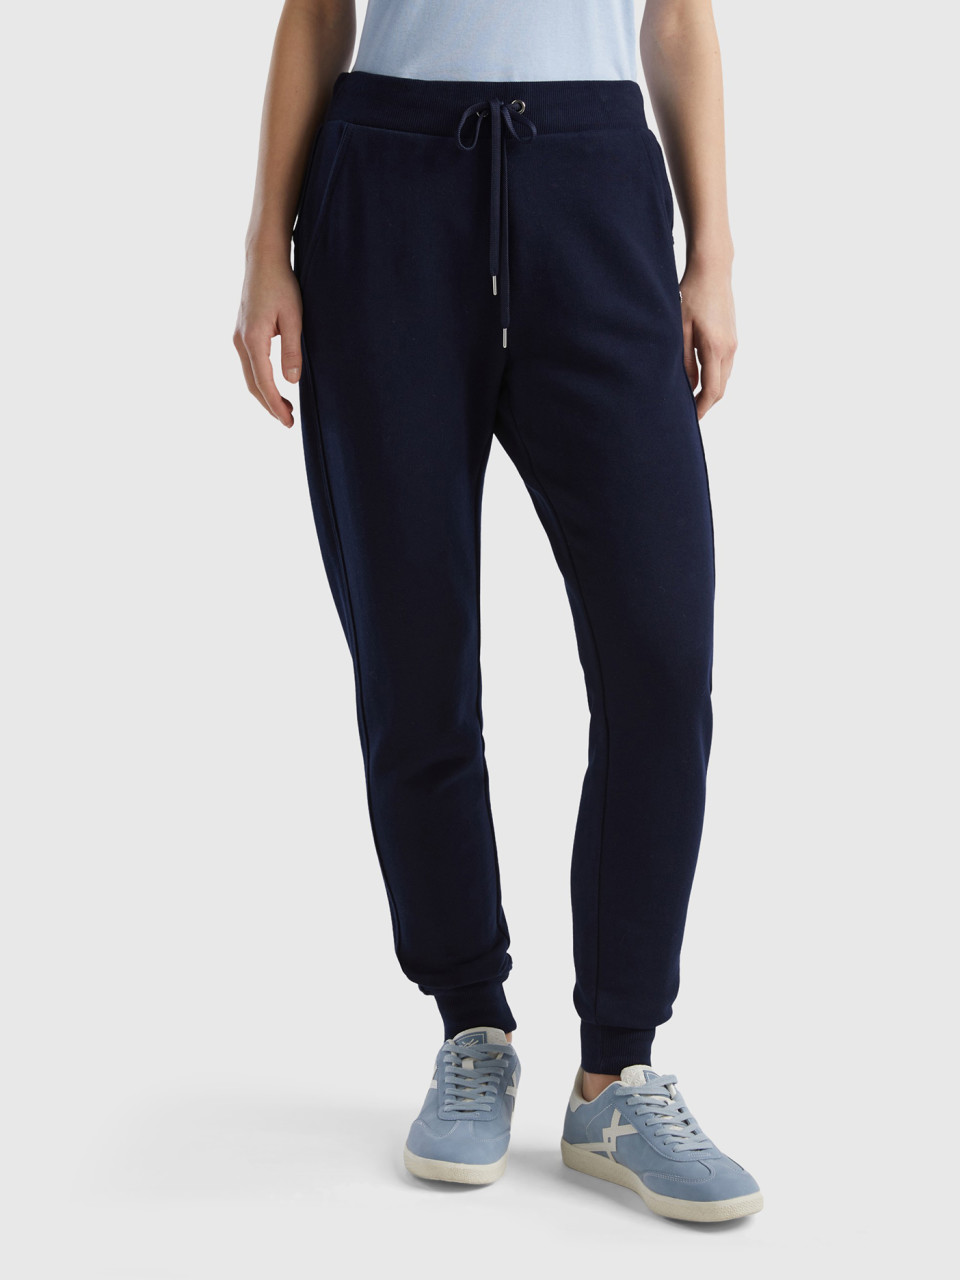 Benetton, Joggers Con Coulisse, Blu Scuro, Donna